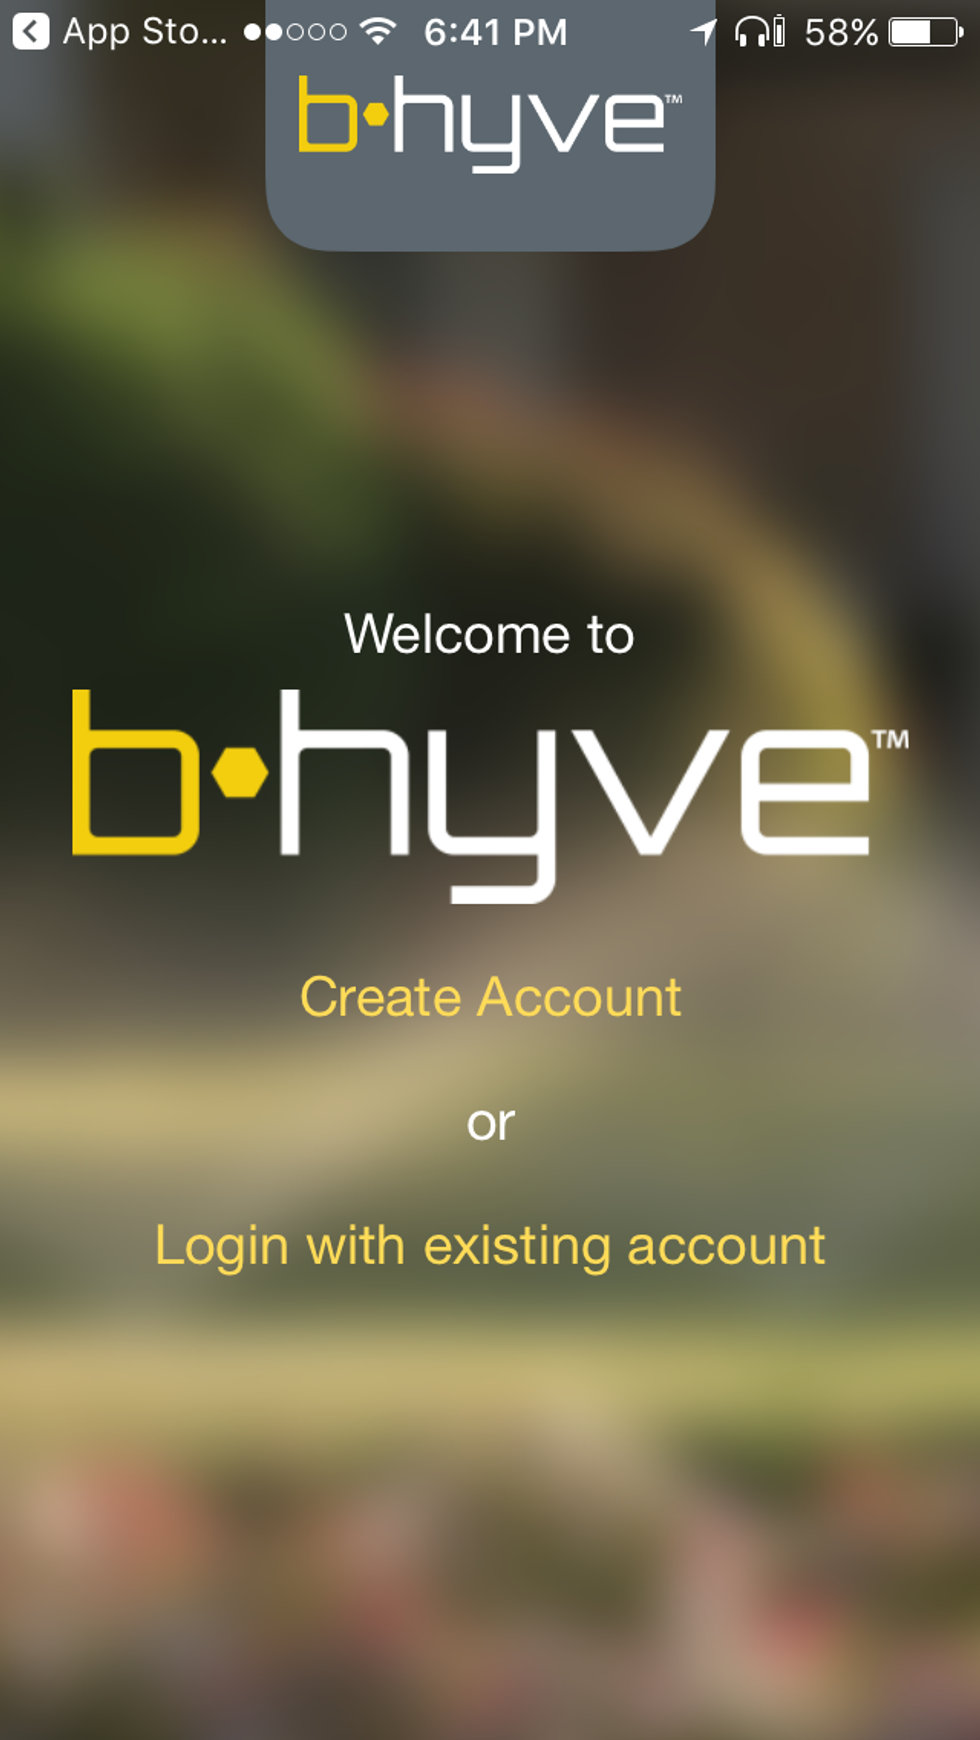 Opening screen to bhyve app